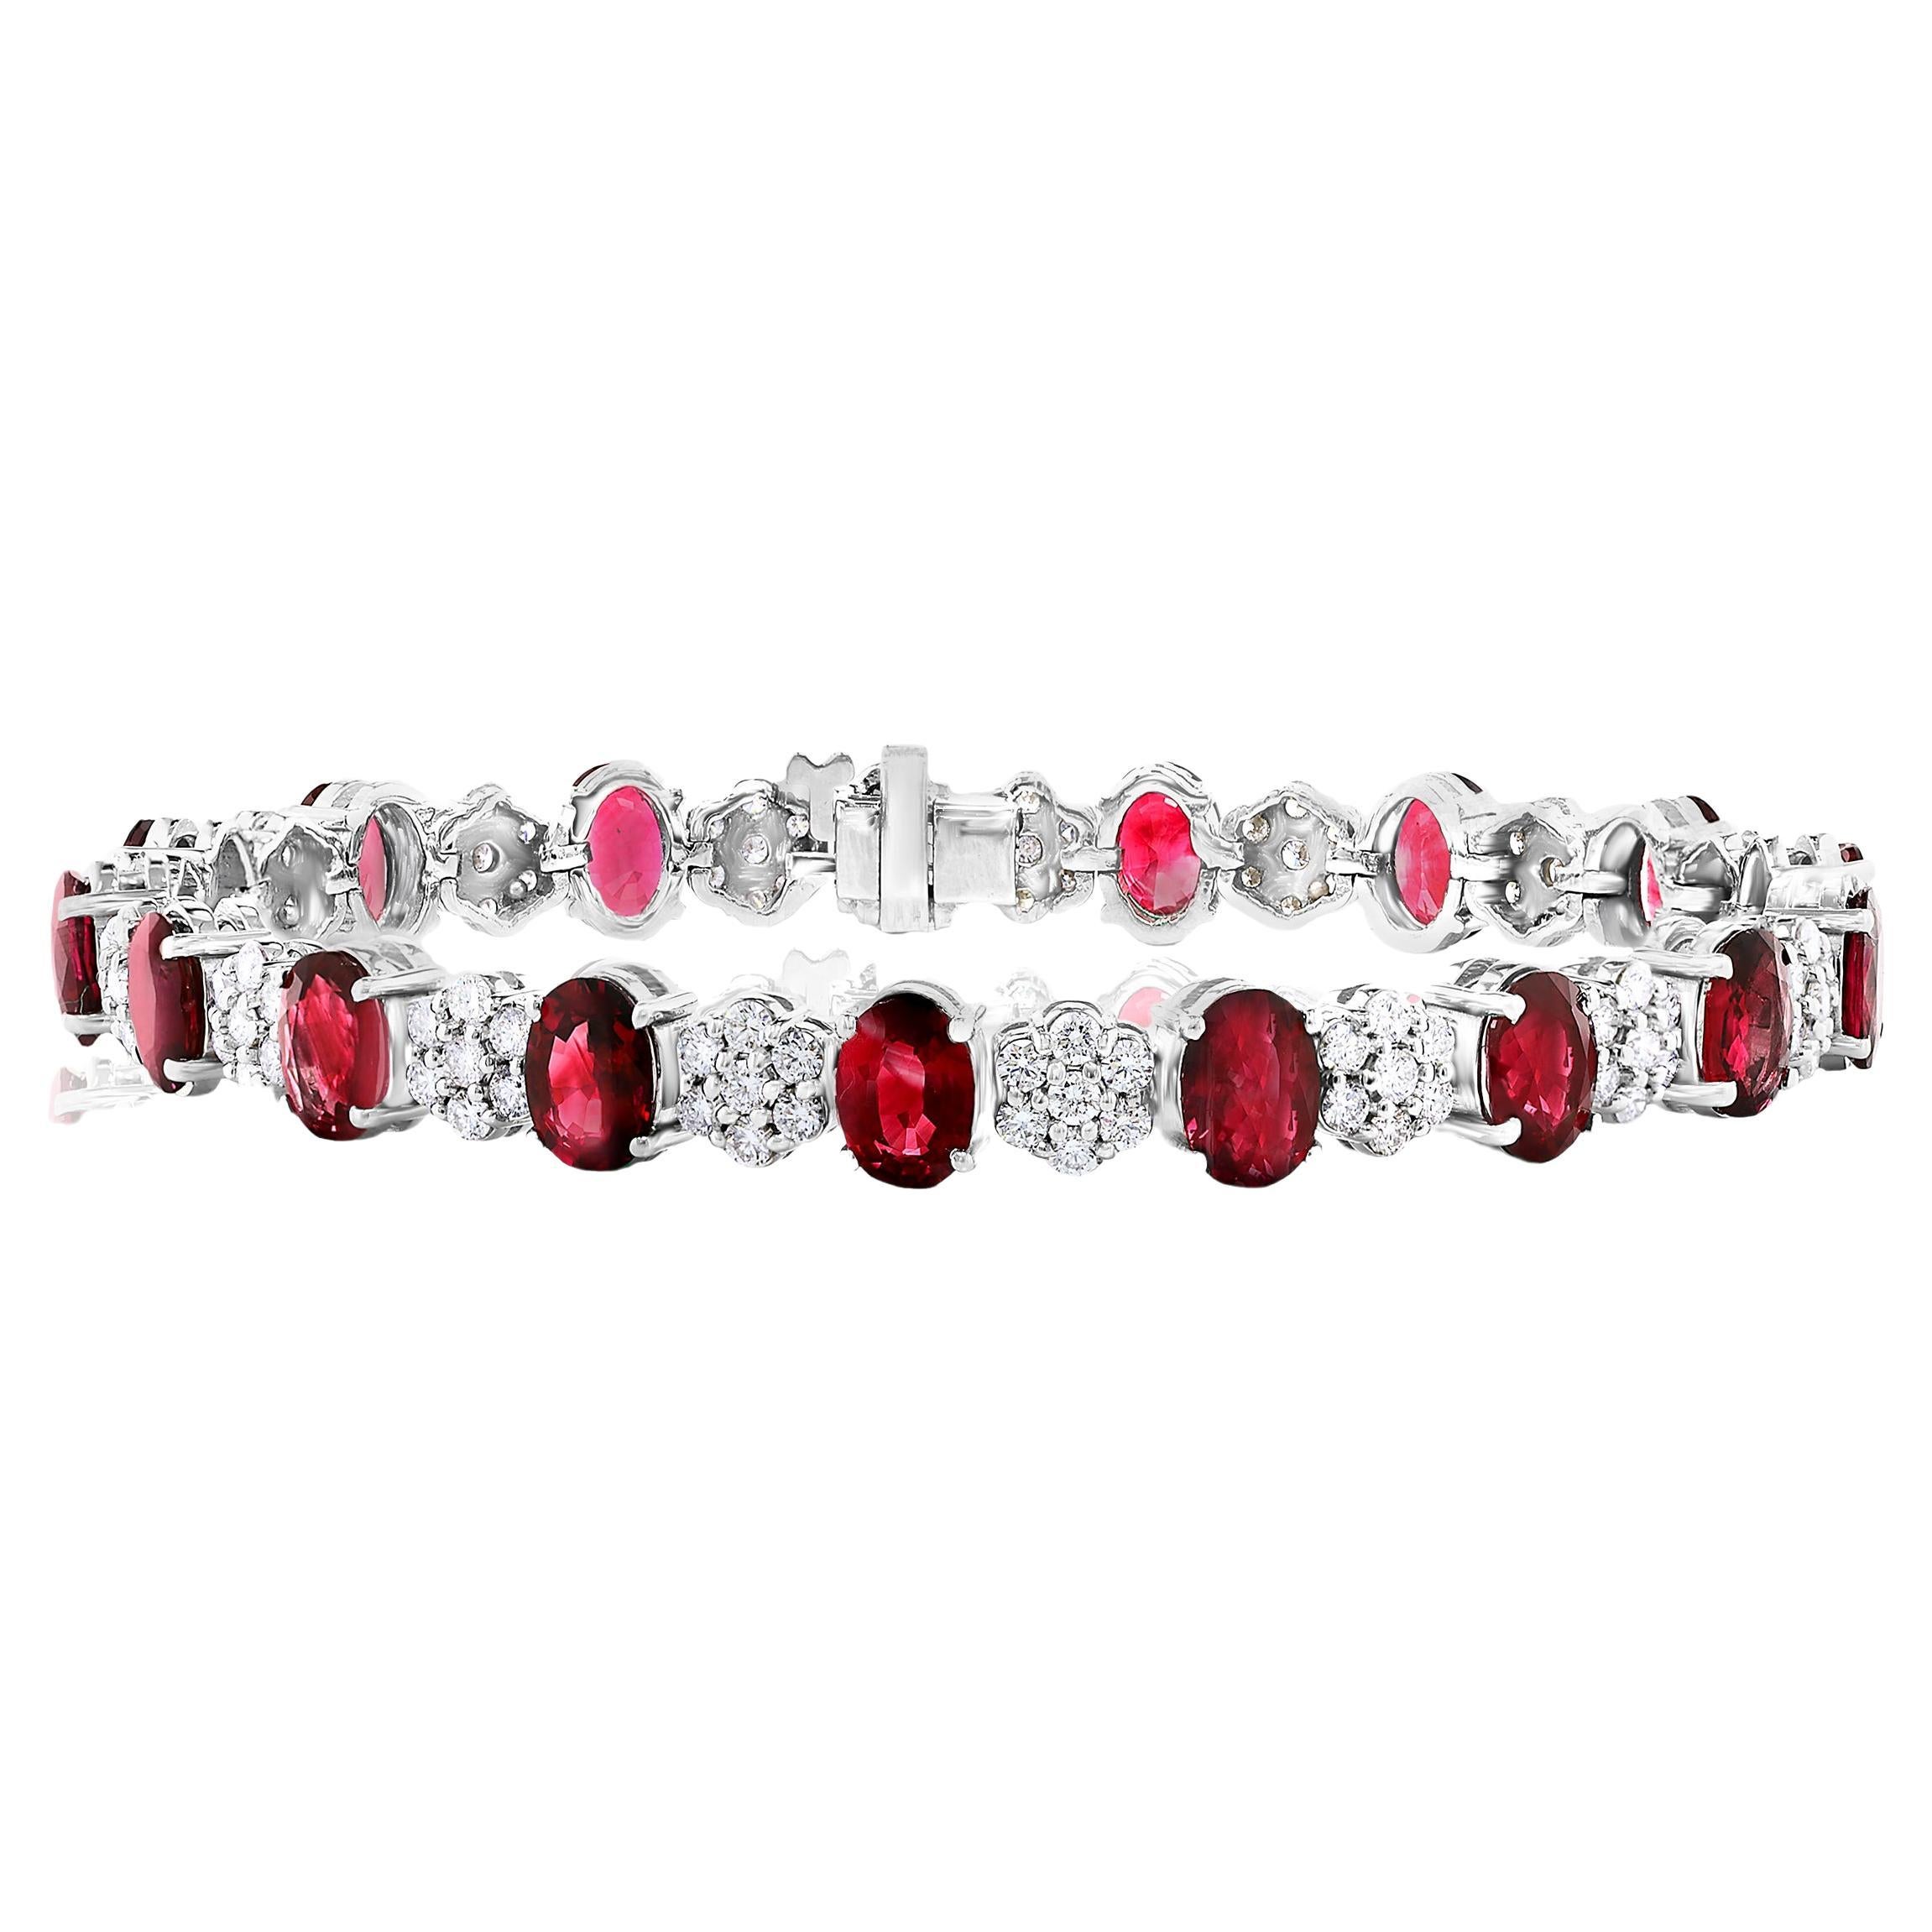 10.34 Carat Oval Cut Ruby and Diamond Tennis Bracelet in 14K White Gold For Sale